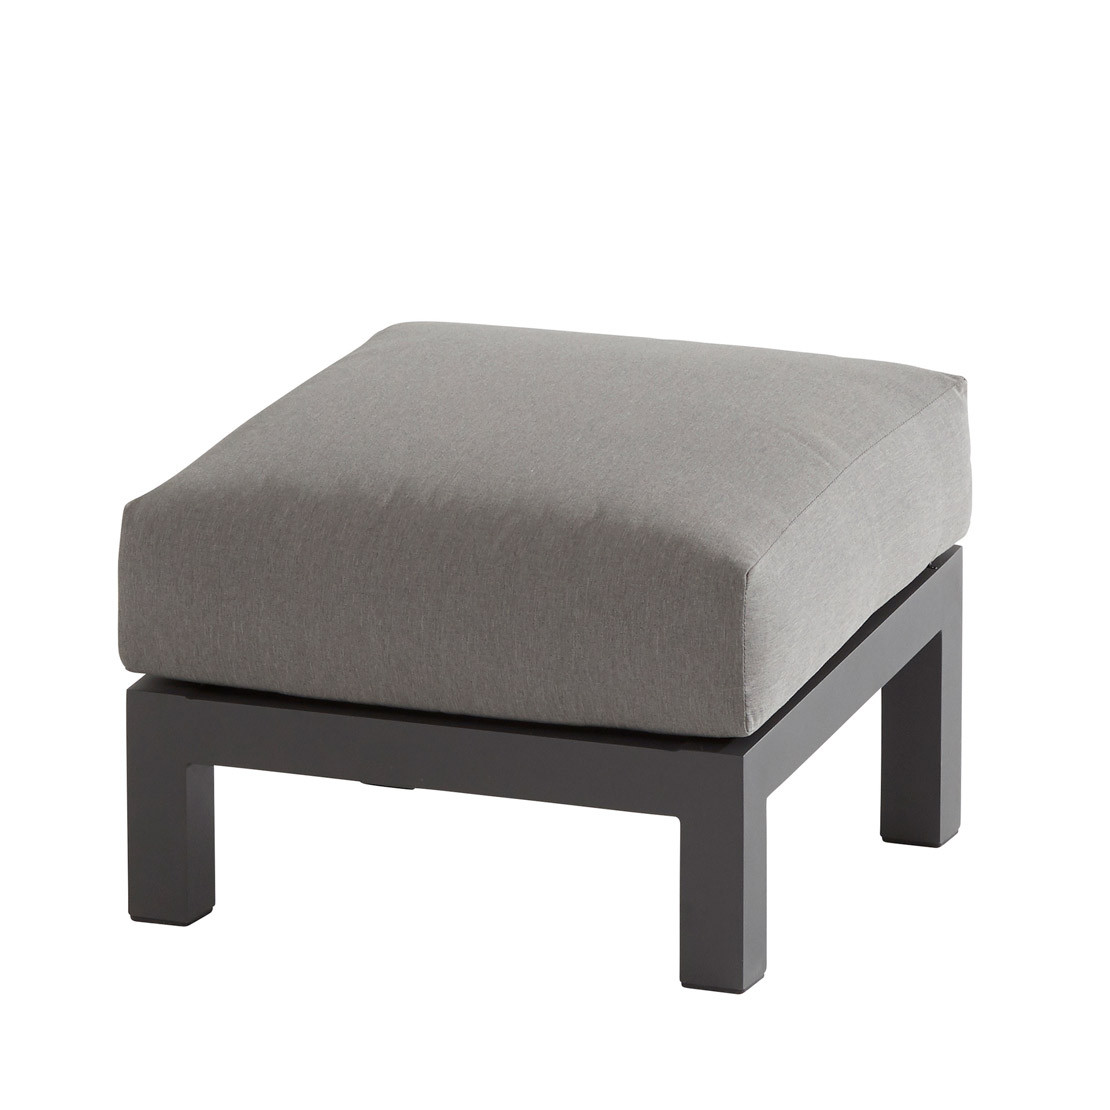 Capitol footstool with cushion Anthracite